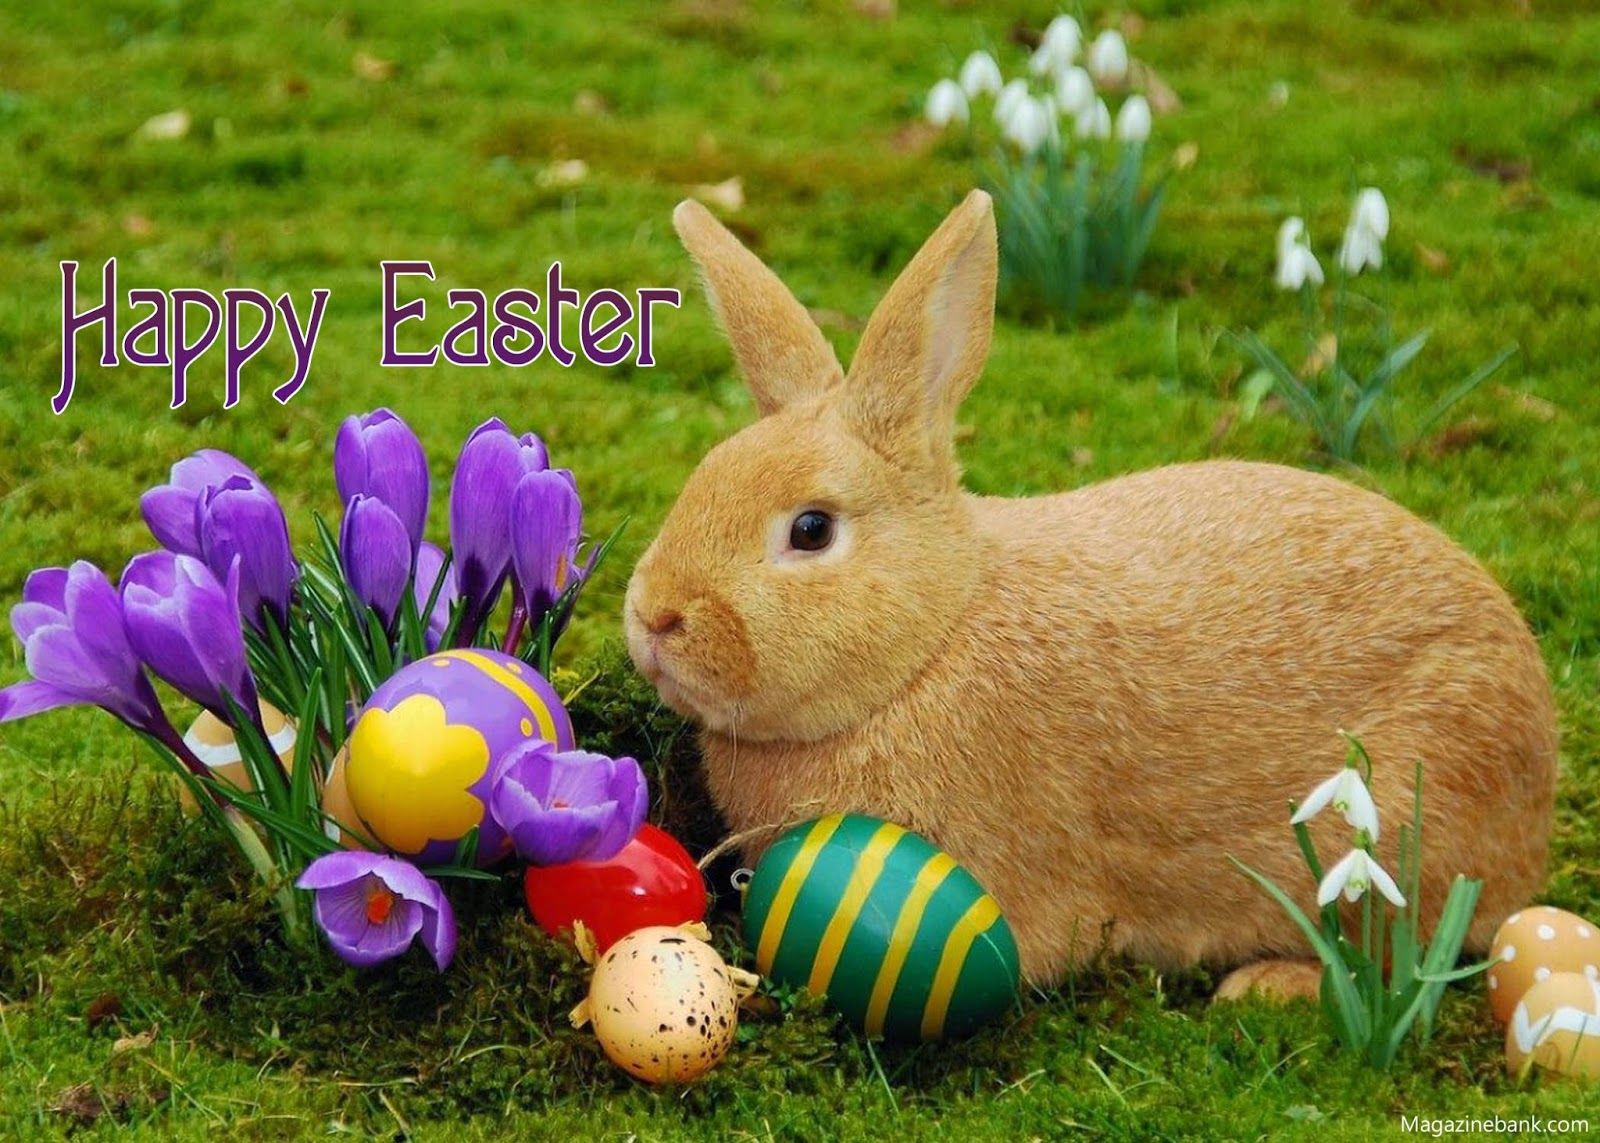 Pretty Happy Easter Picture, Photo, and Image for Facebook